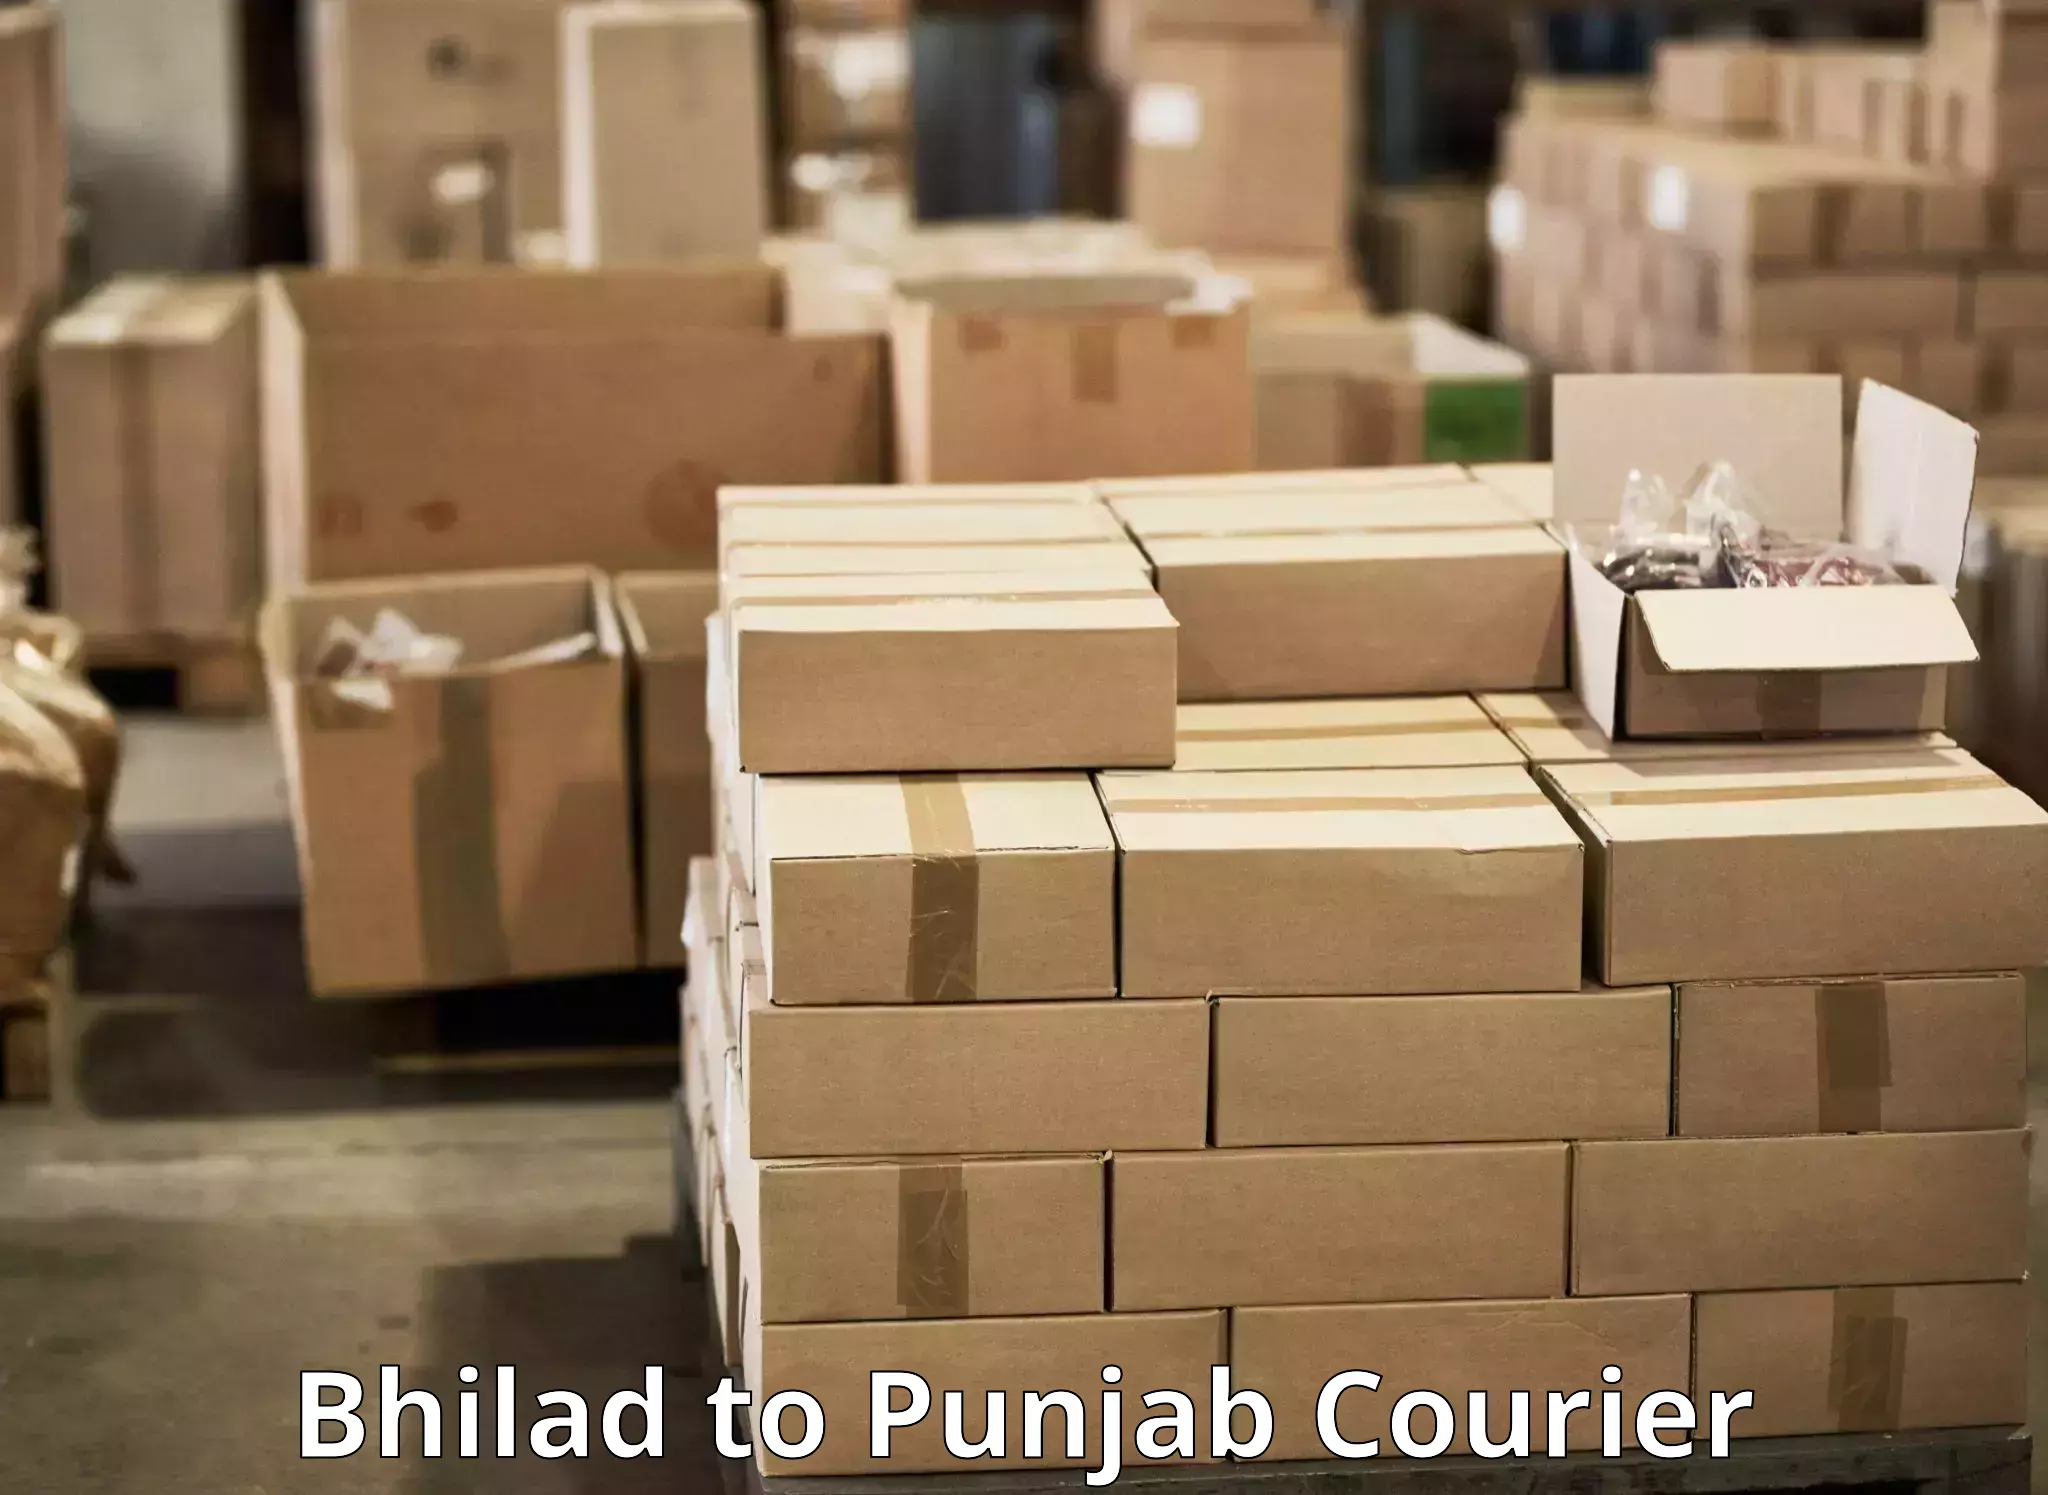 Global shipping networks in Bhilad to Fazilka